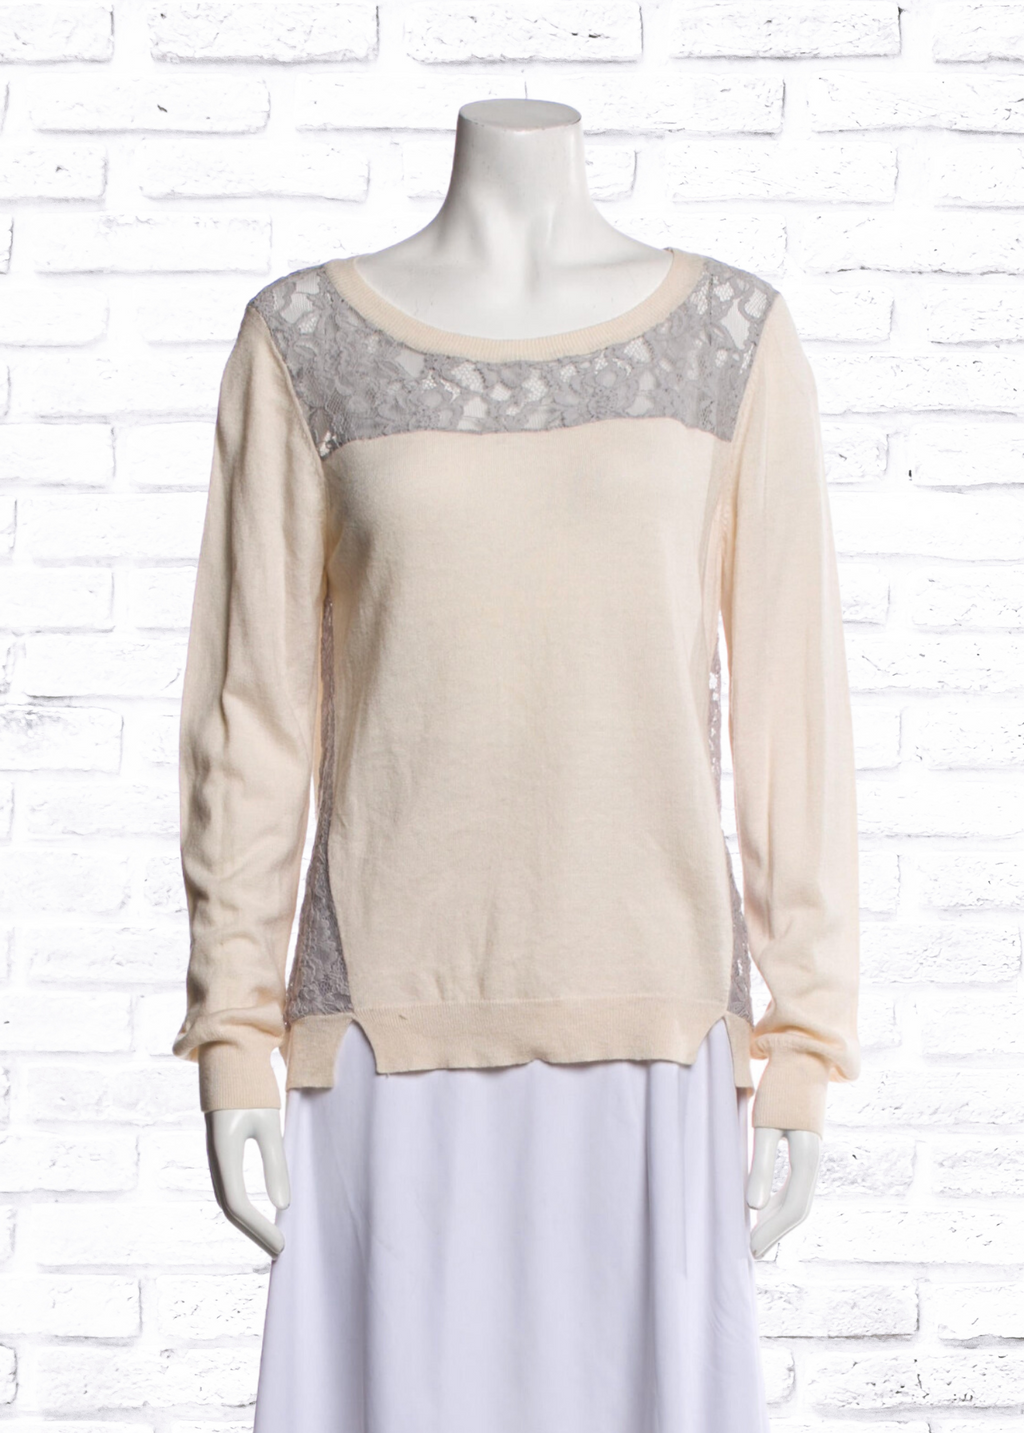 Rebecca Taylor Lightweight Wool-Blend Sweater w/ Lace Accents